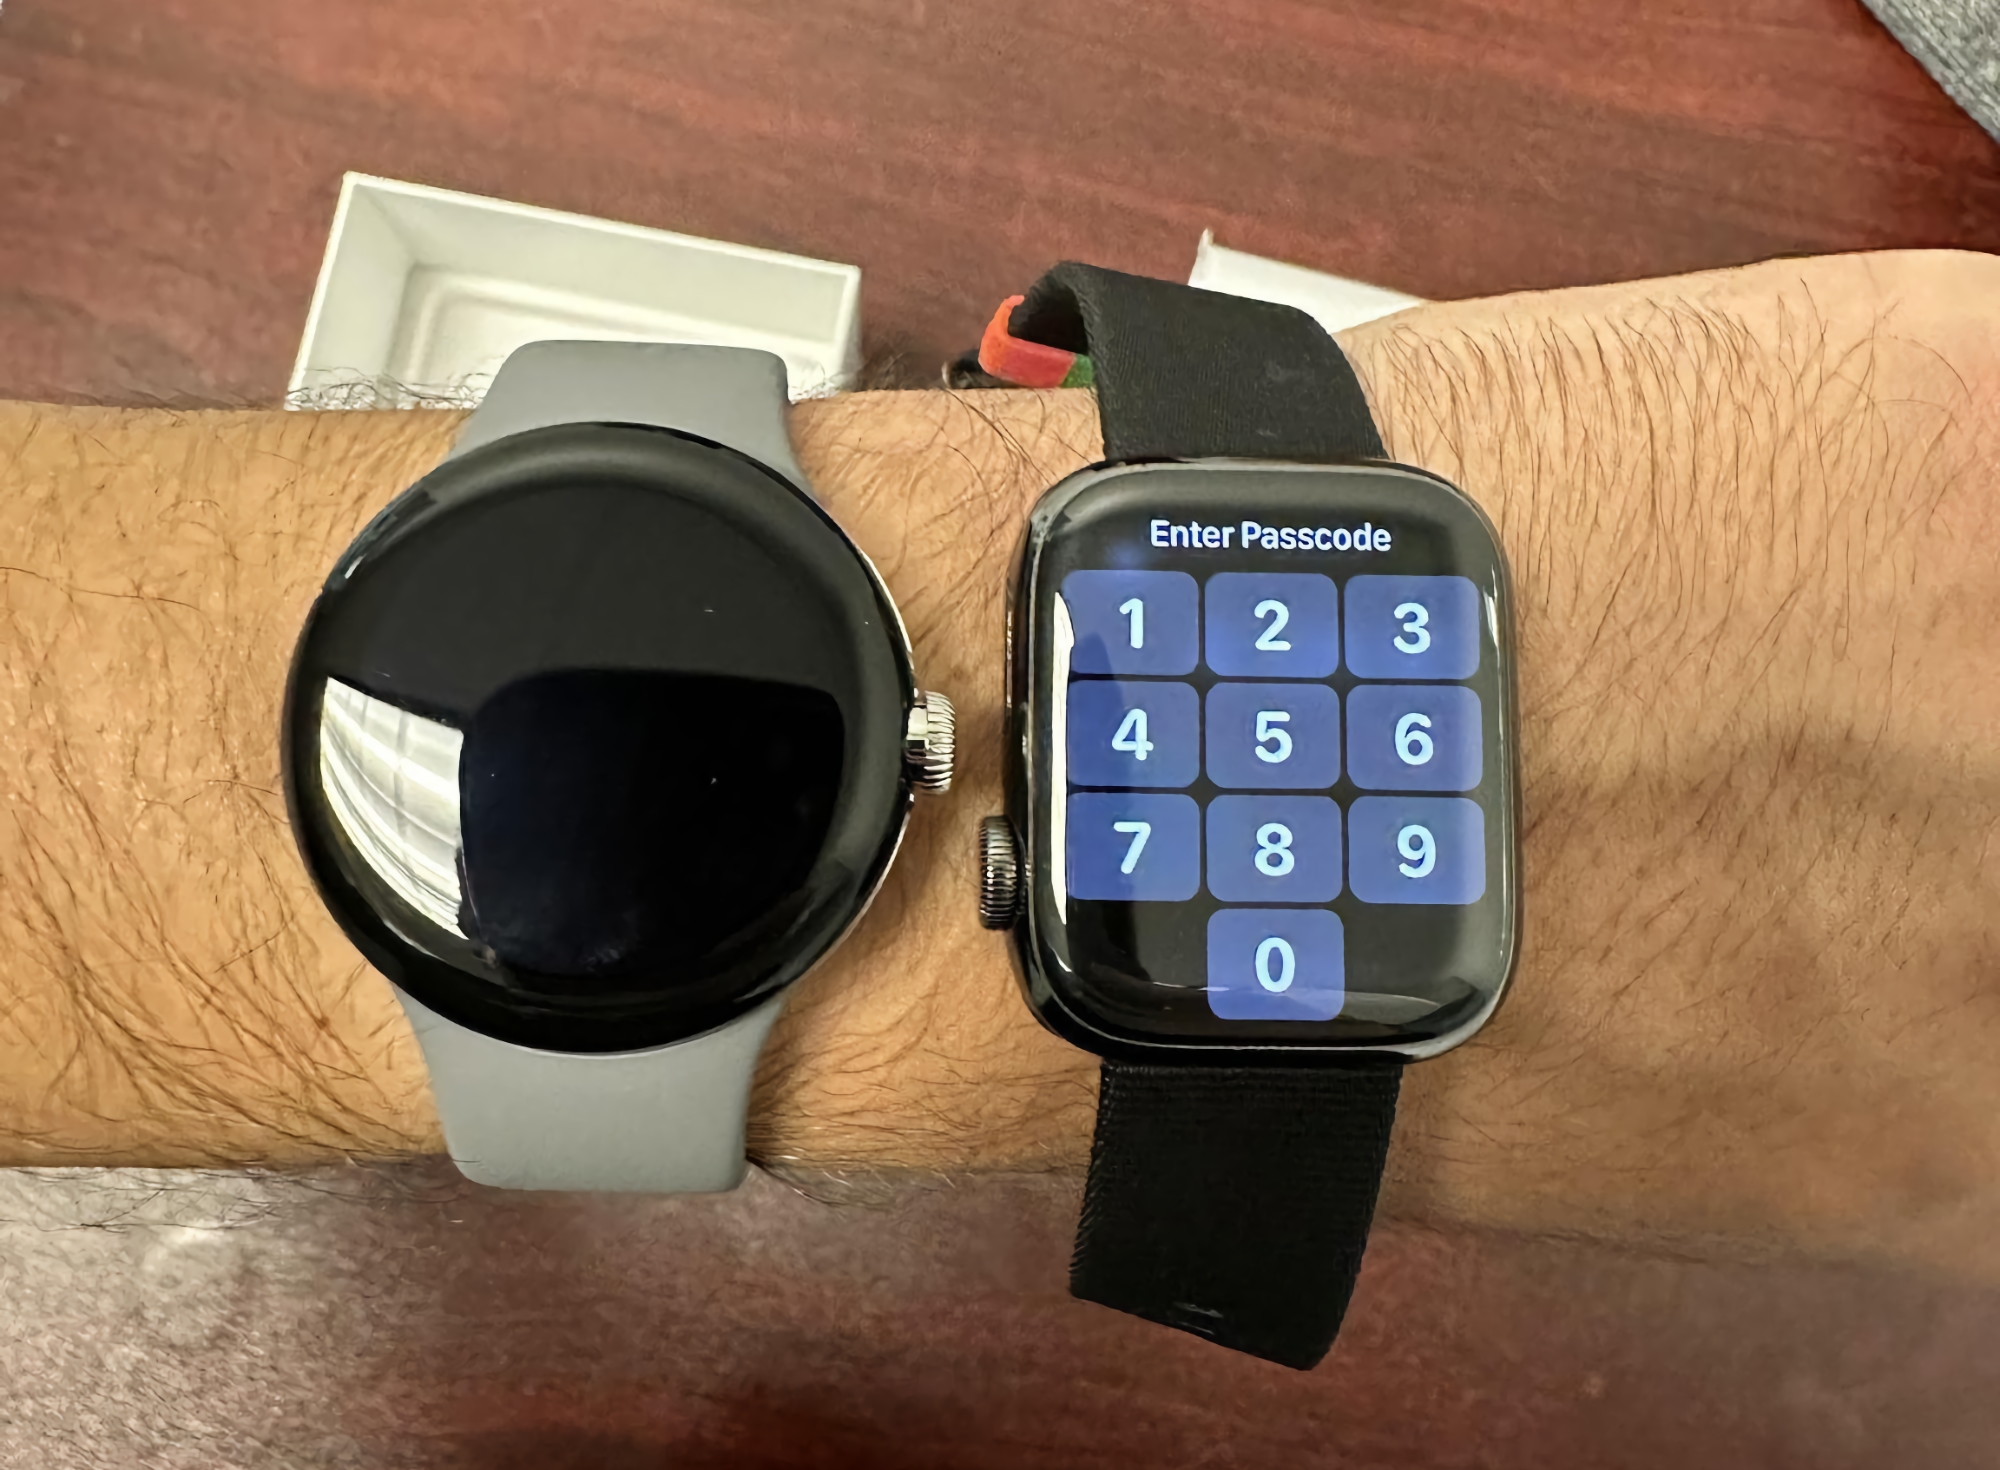 Reddit user showed "live" images of Pixel Watch, Google's novelty was compared with Apple Watch